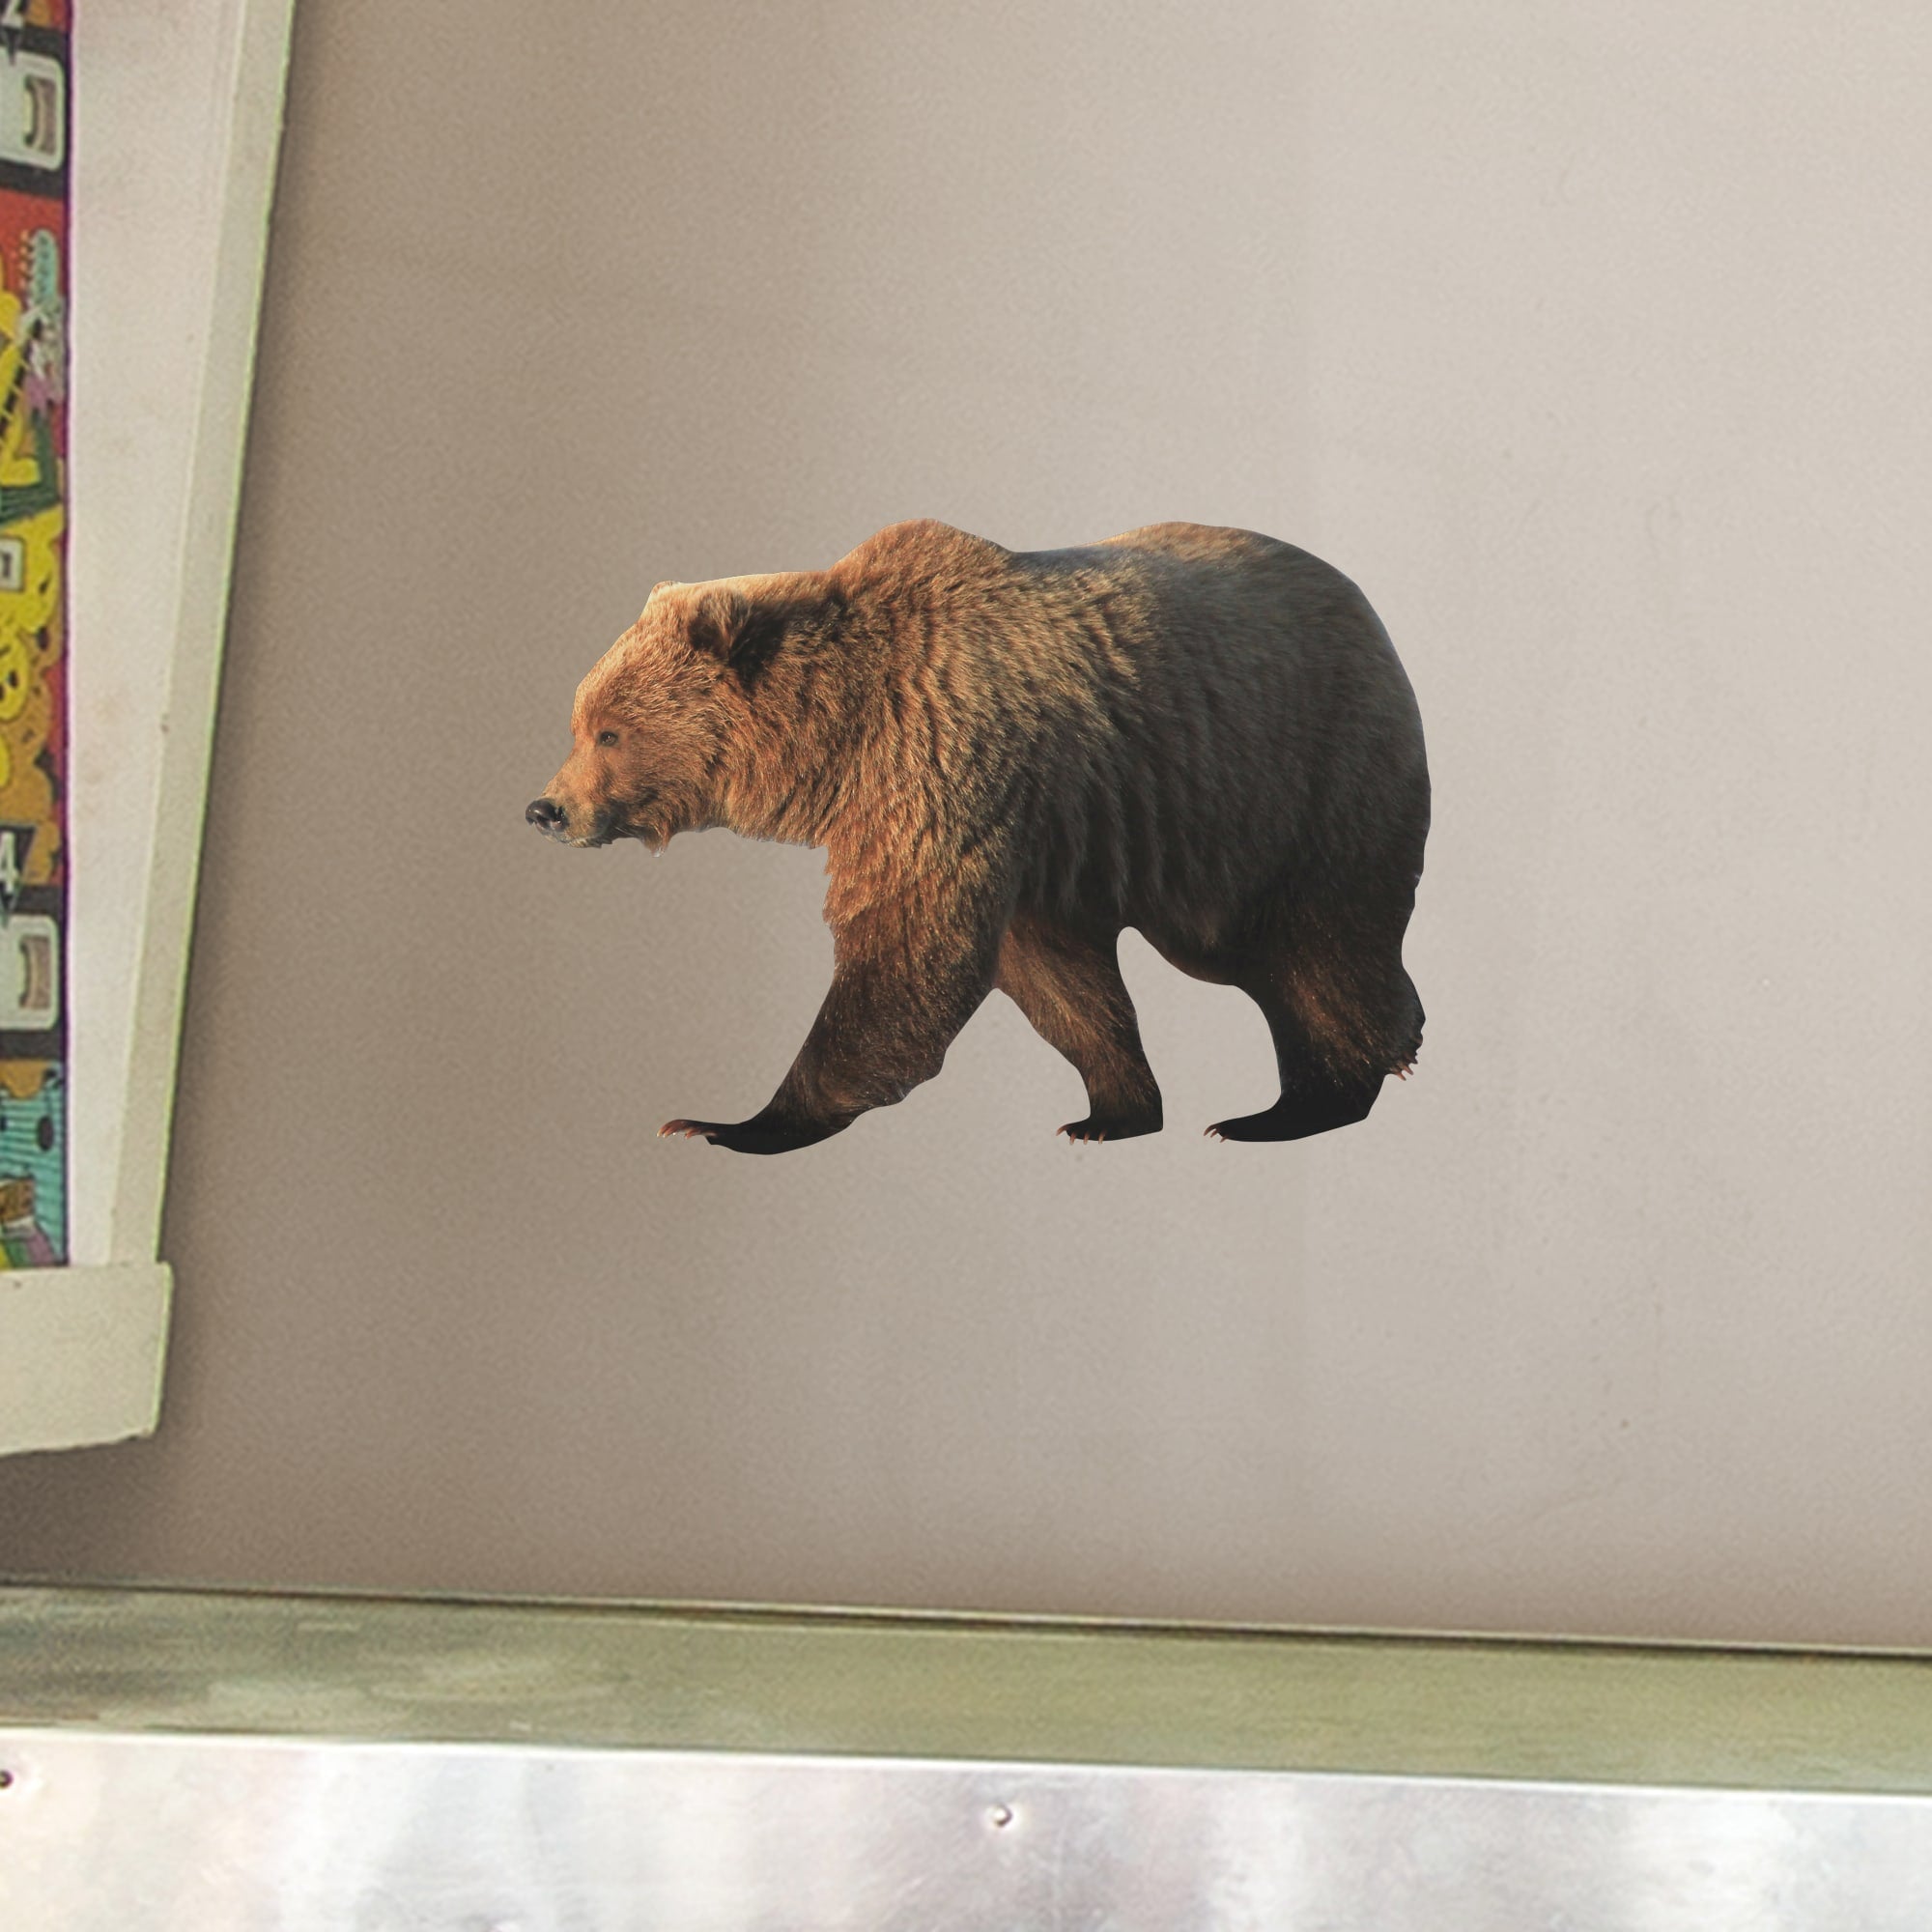 Grizzly Bear - Removable Vinyl Decal Large by Fathead